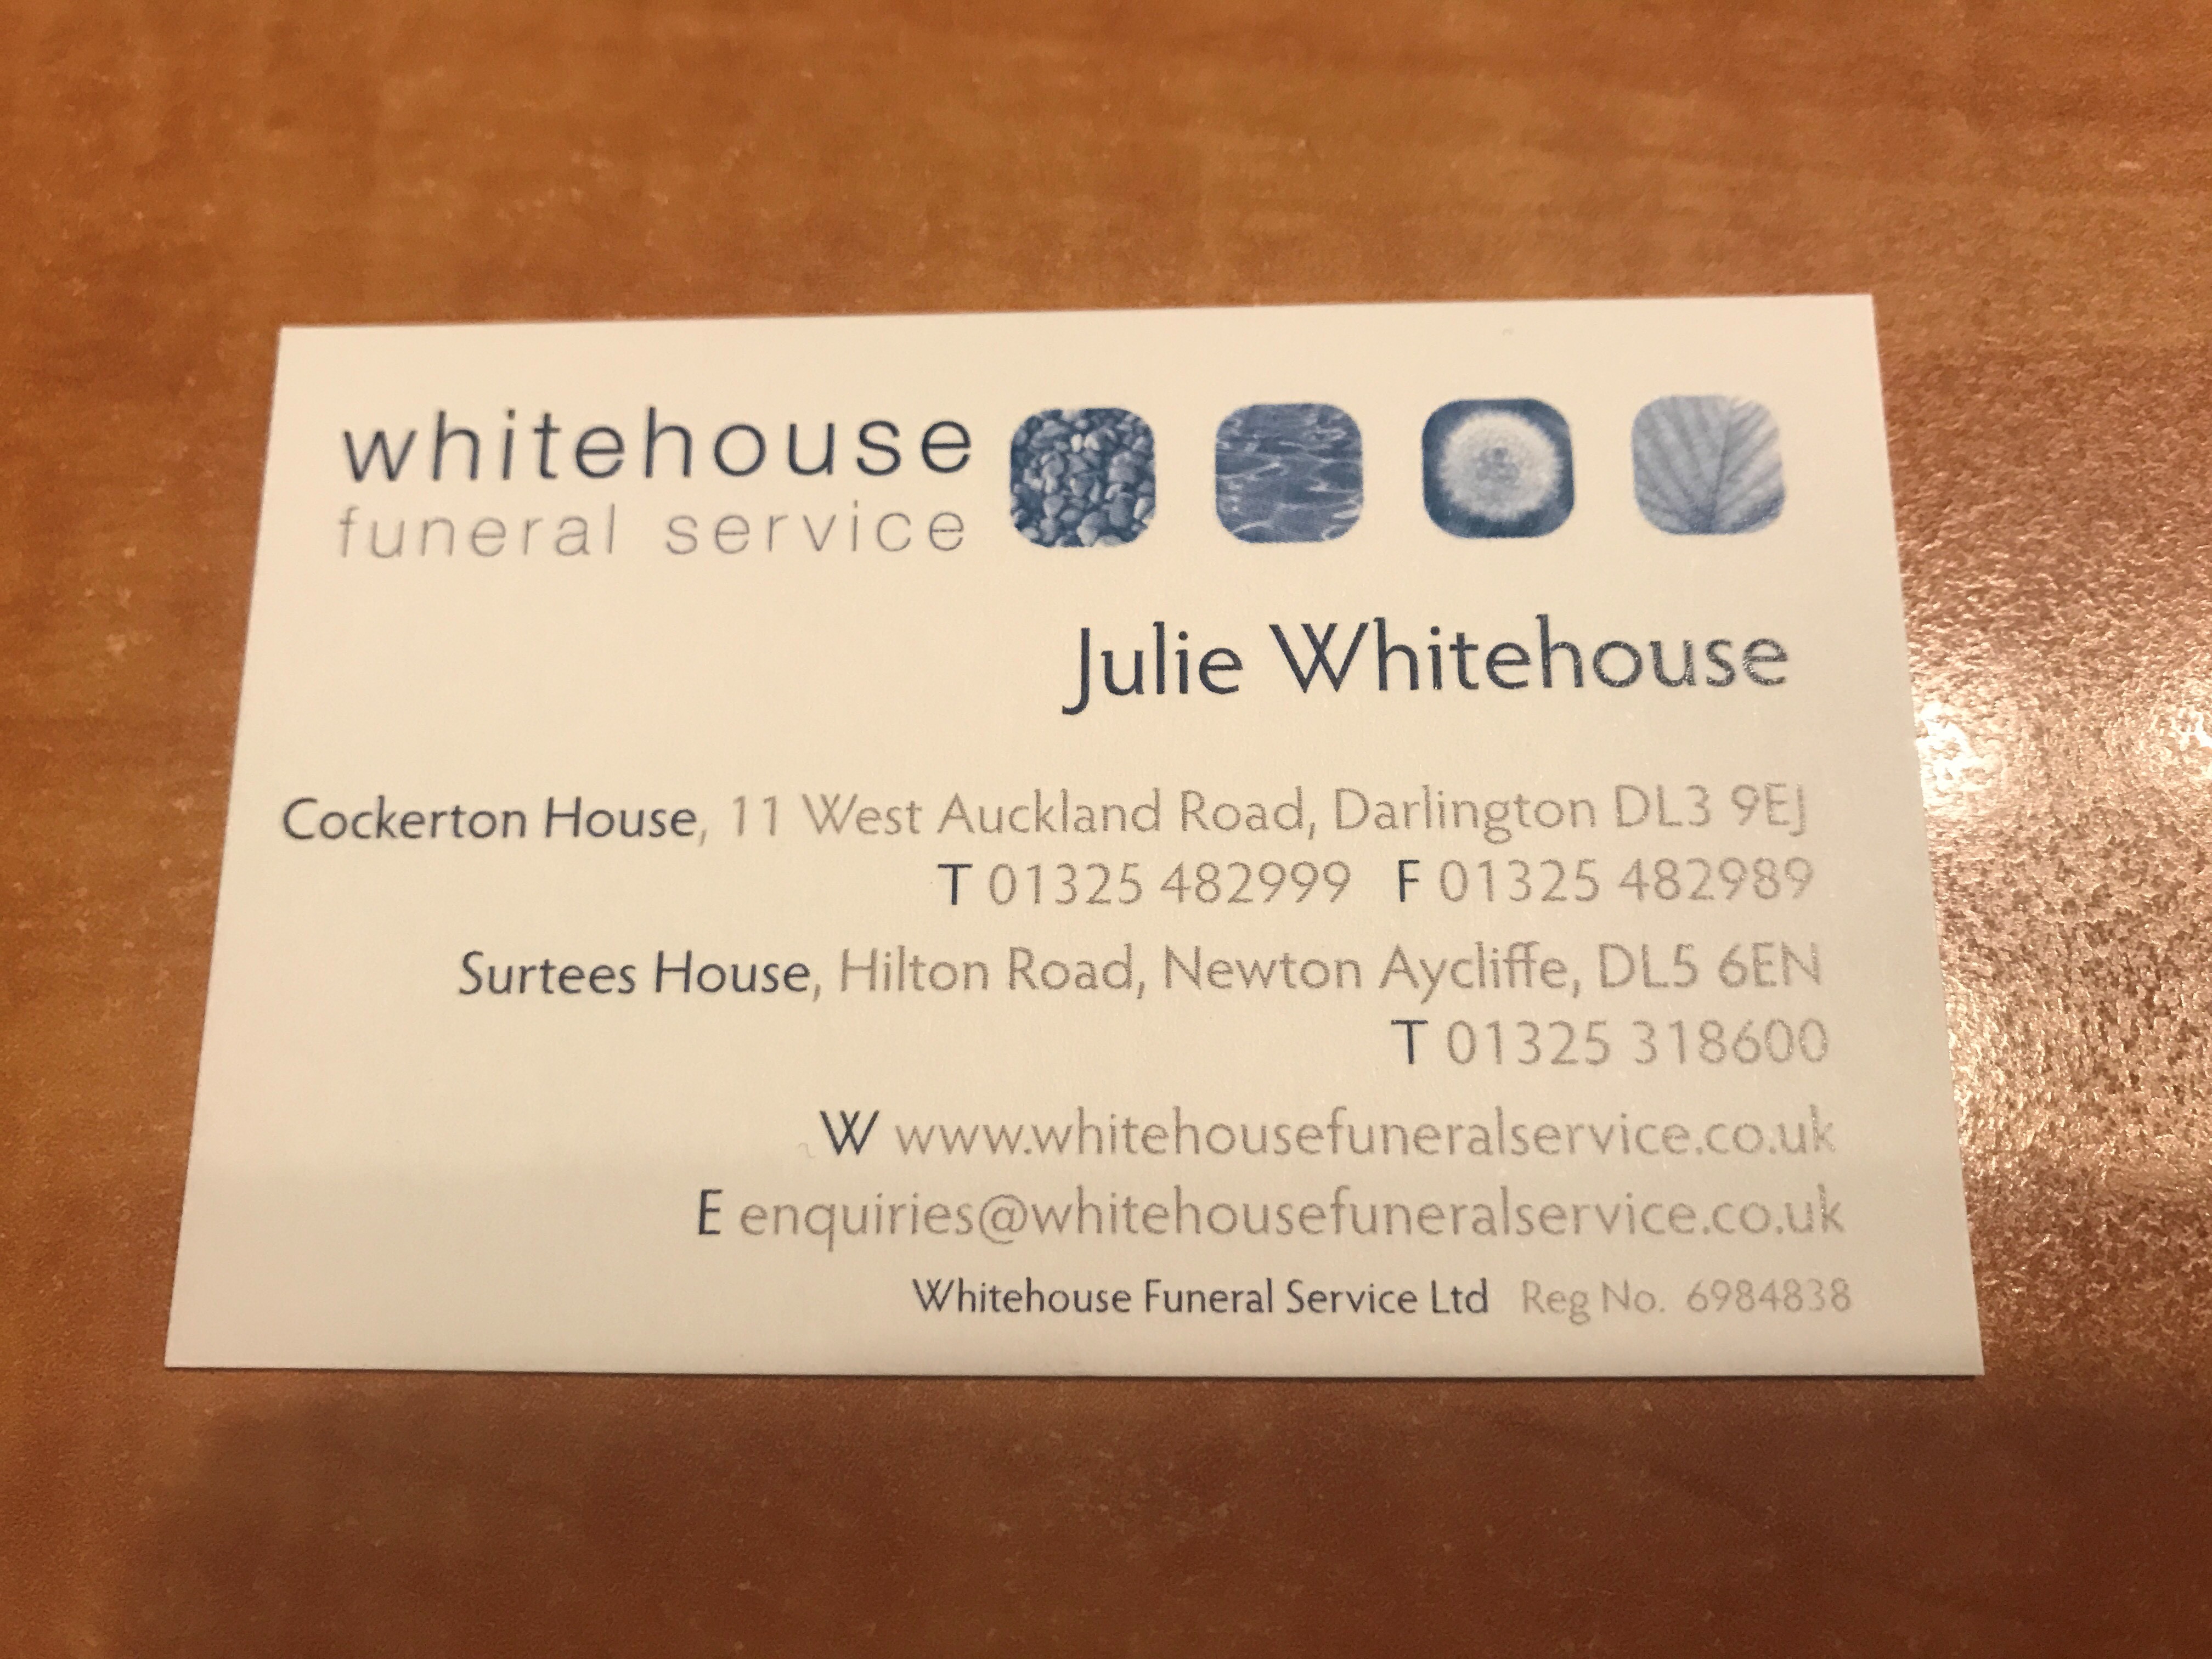 Our latest and first lady Funeral Director